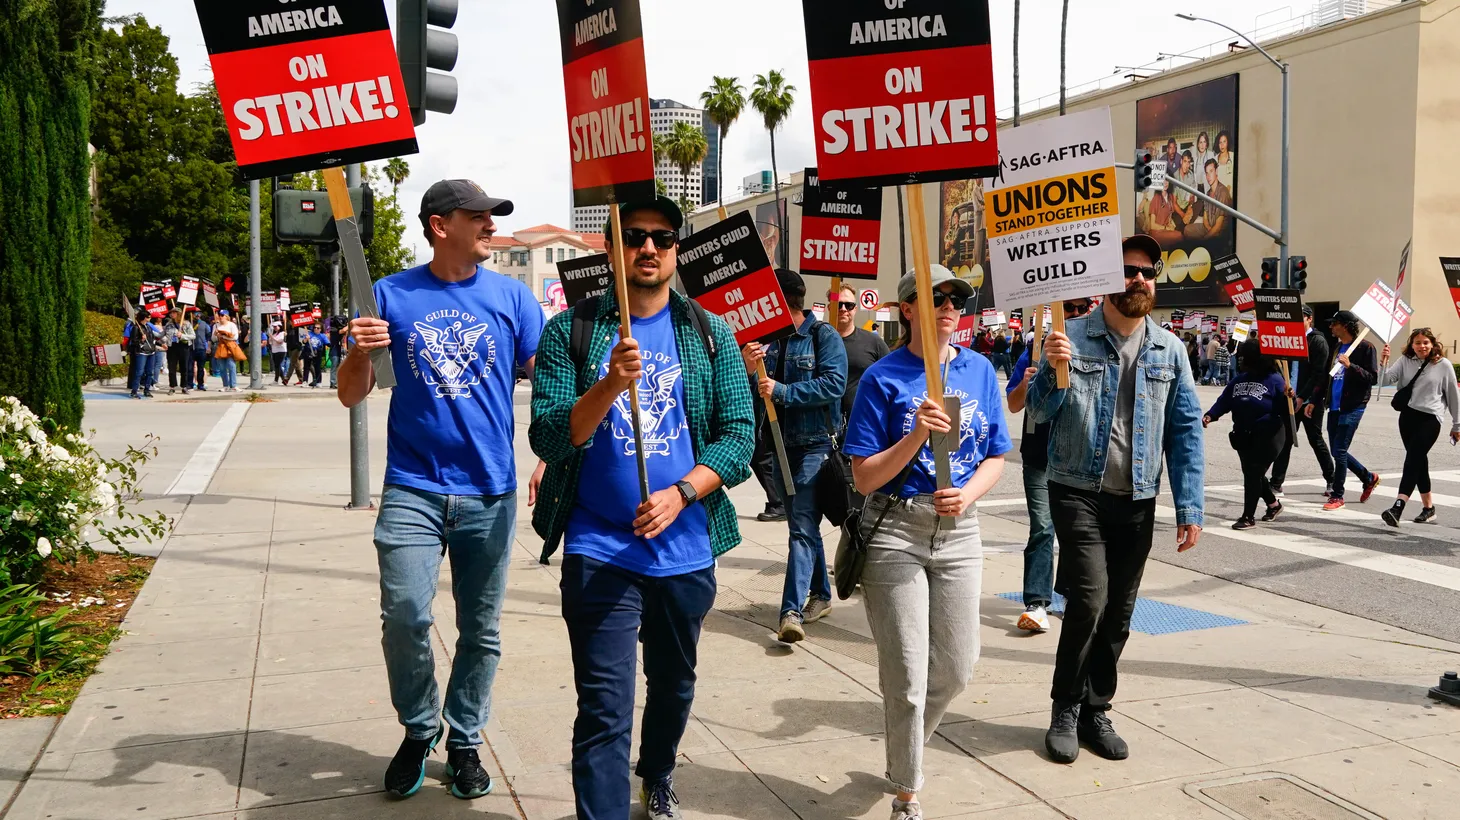 Members of the Writers Guild of America picket in front of Warner Brothers Studio in Burbank, Calif., May 5, 2023. The strike comes after weeks of negotiations failed to generate a contract between the guild and the Alliance of Motion Picture and Television Producers (AMPTP), which bargains on behalf of the nine largest studios. The WGA represents most writers for film and TV in the U.S.